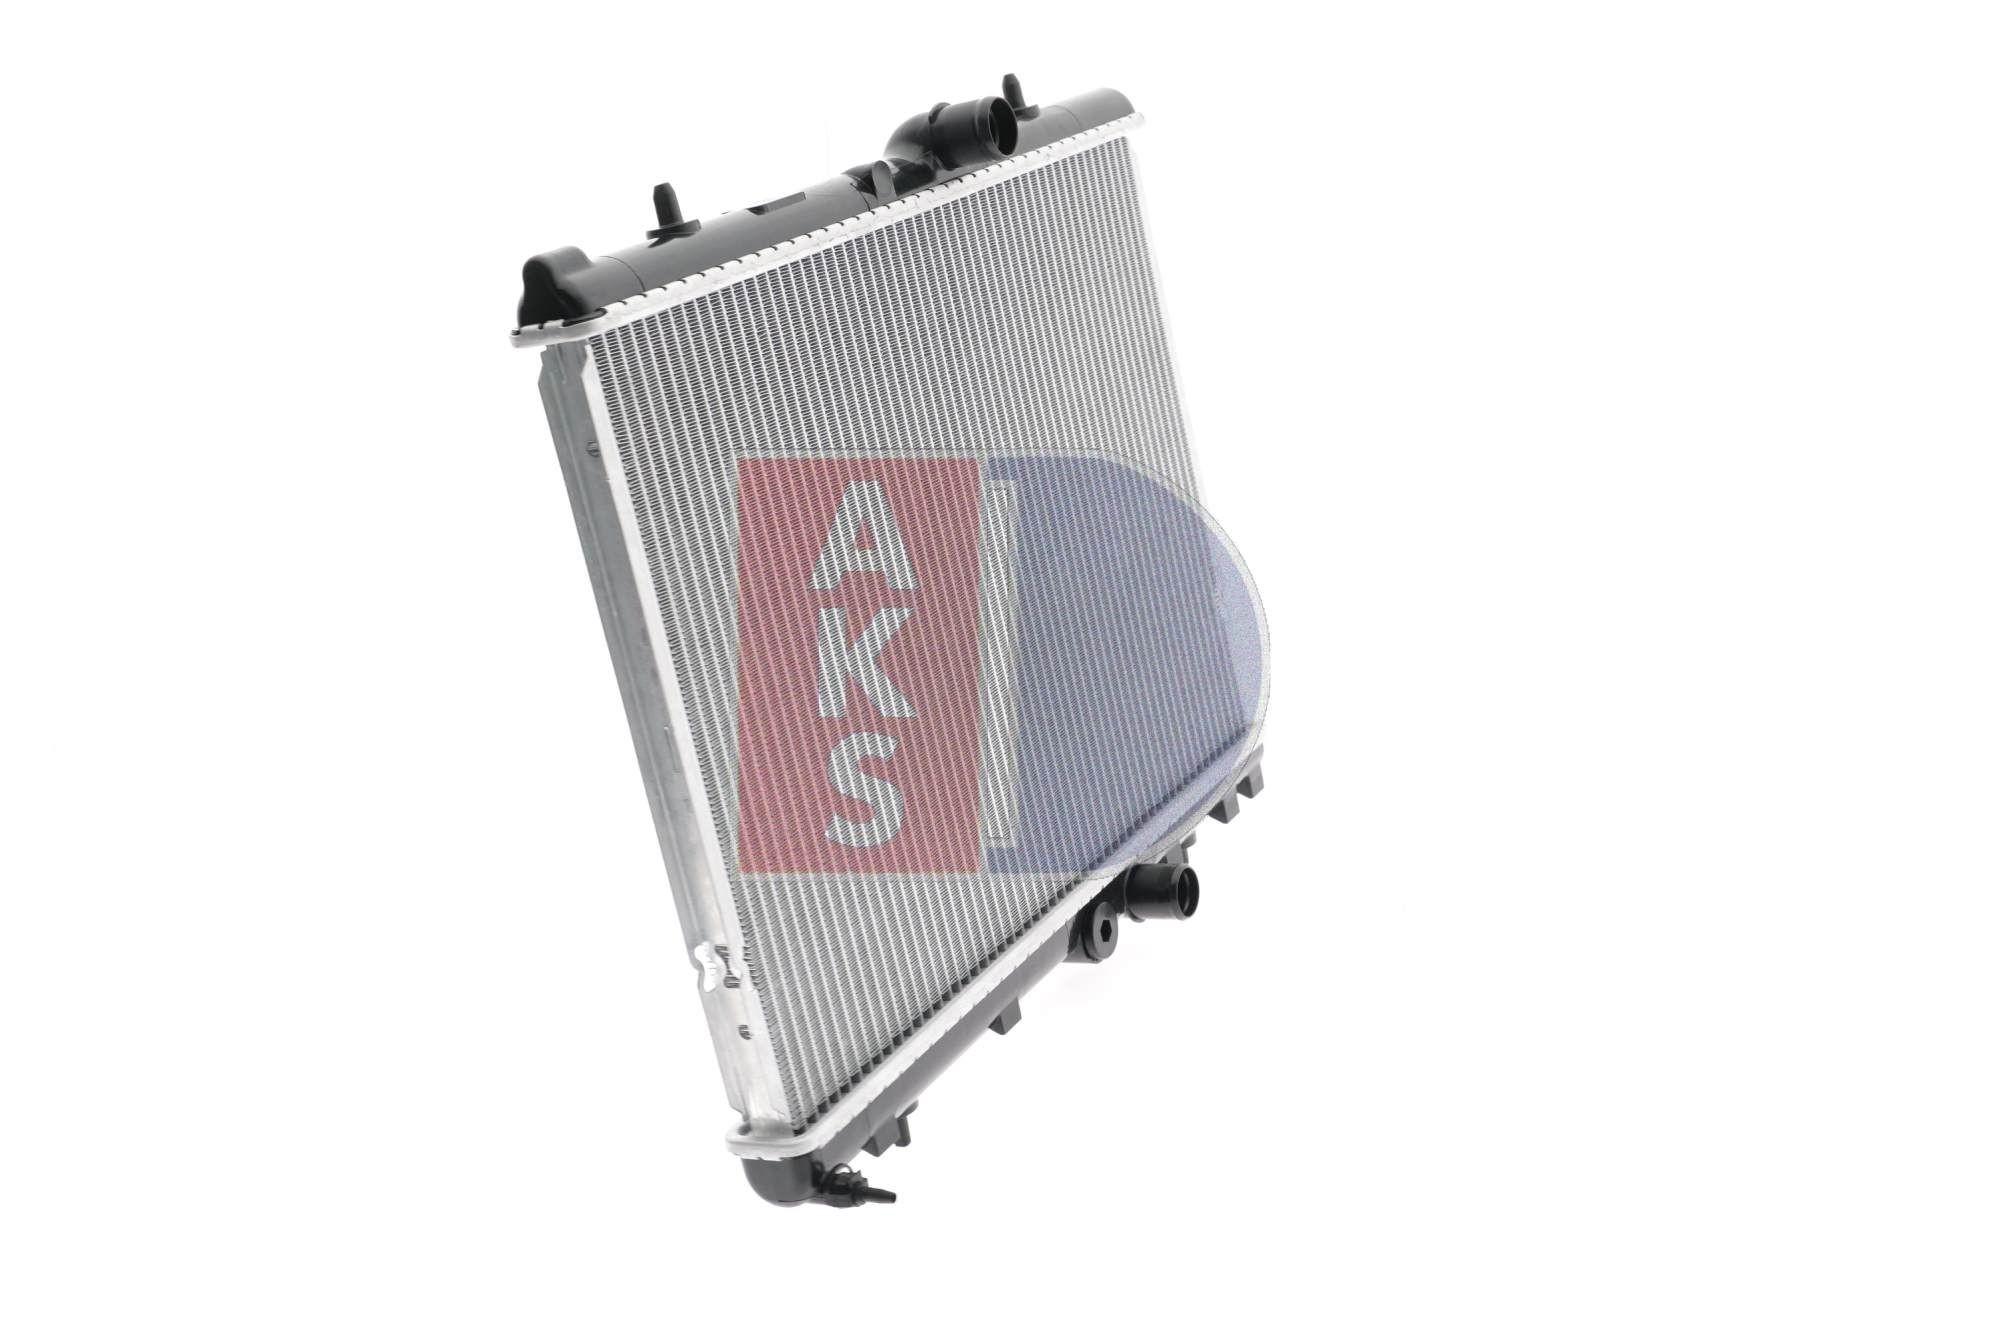 060046N Radiator 060046N AKS DASIS for vehicles with/without air conditioning, 380 x 560 x 18 mm, Manual Transmission, Brazed cooling fins